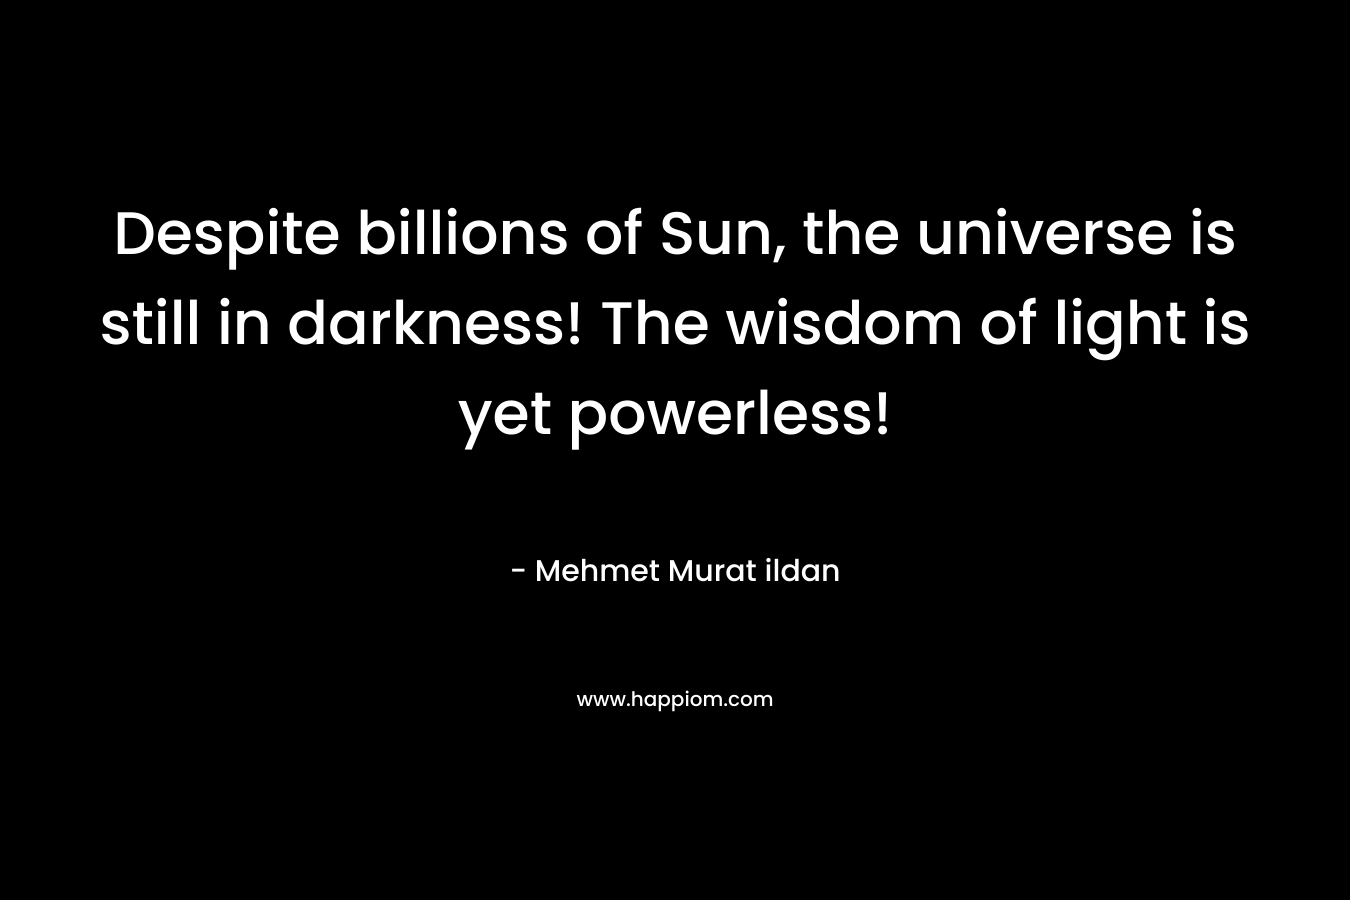 Despite billions of Sun, the universe is still in darkness! The wisdom of light is yet powerless!